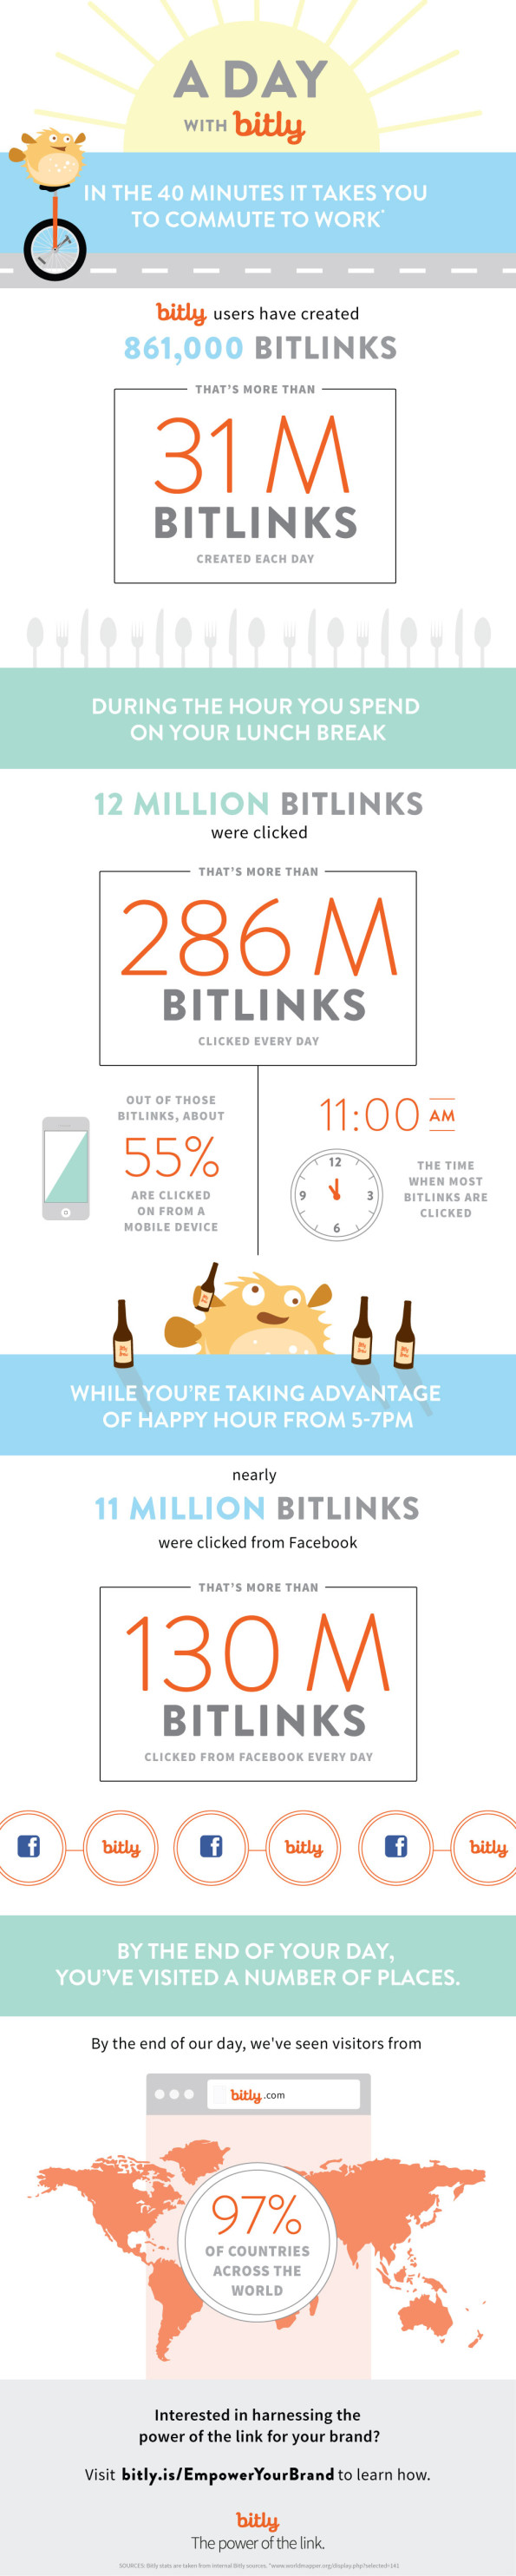 ADayWithBitly_Infographic